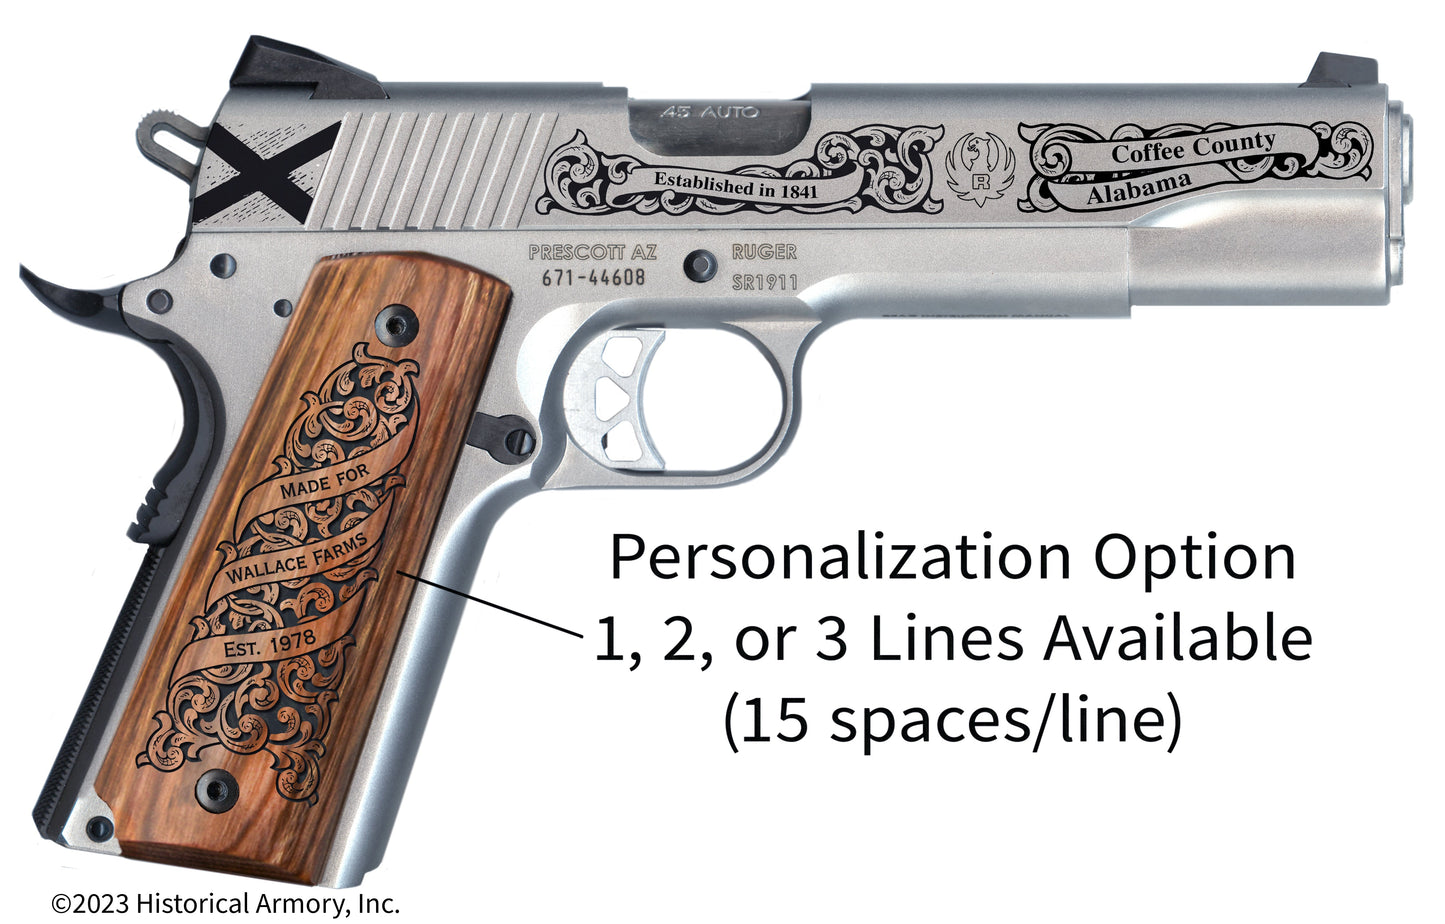 Coffee  County Alabama Personalized Engraved .45 Auto Ruger 1911